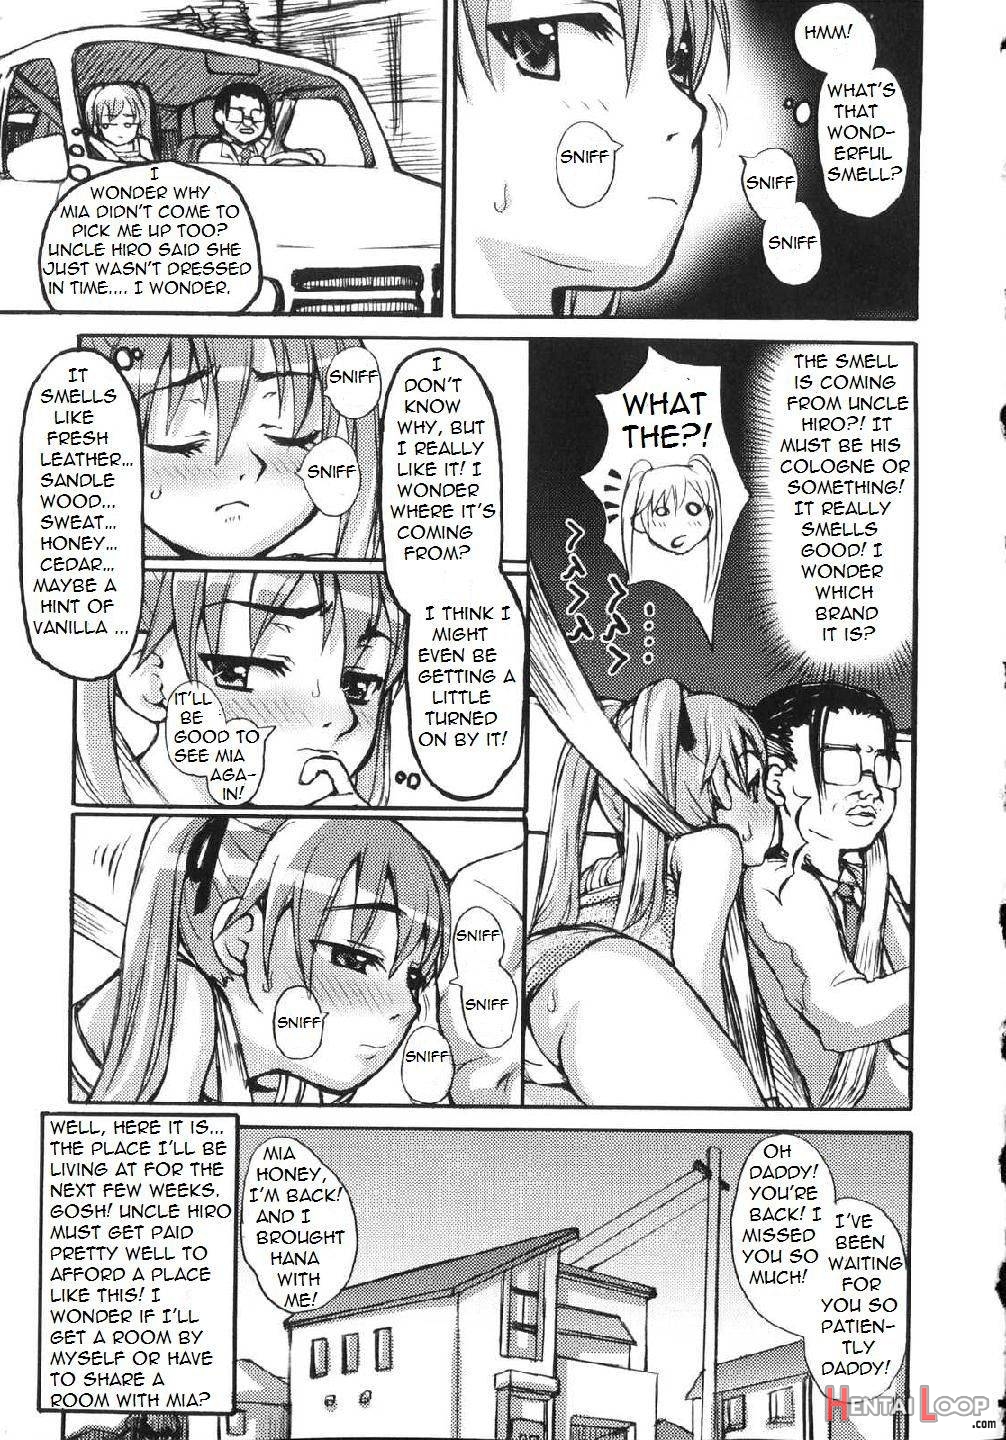 The Smell of Incest page 2